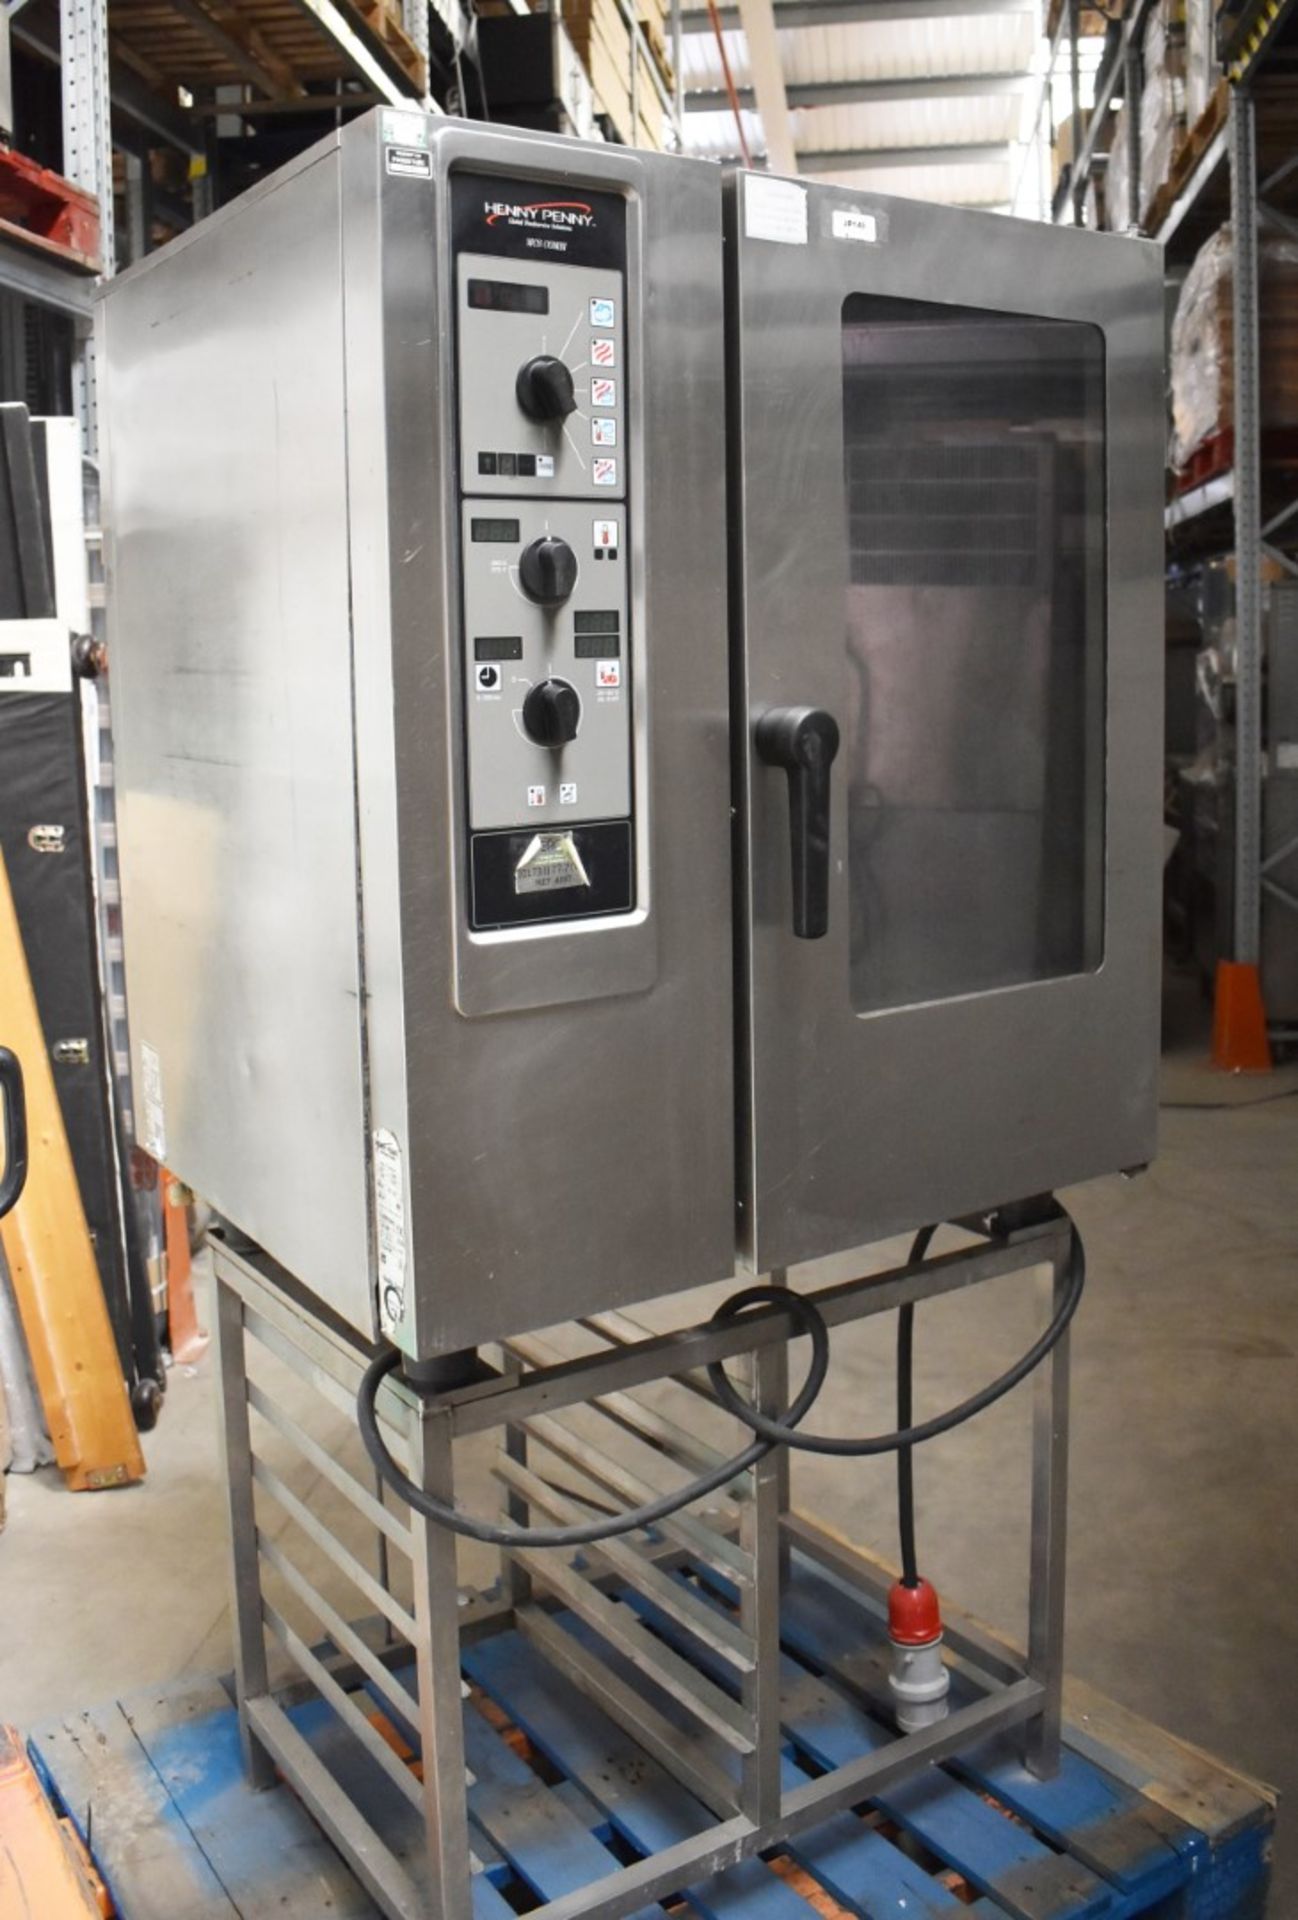 1 x Henny Penny MCS 101 Commercial Electric Combi Oven With Stainless Steel Stand - 3 Phase - CL011 - Image 6 of 9